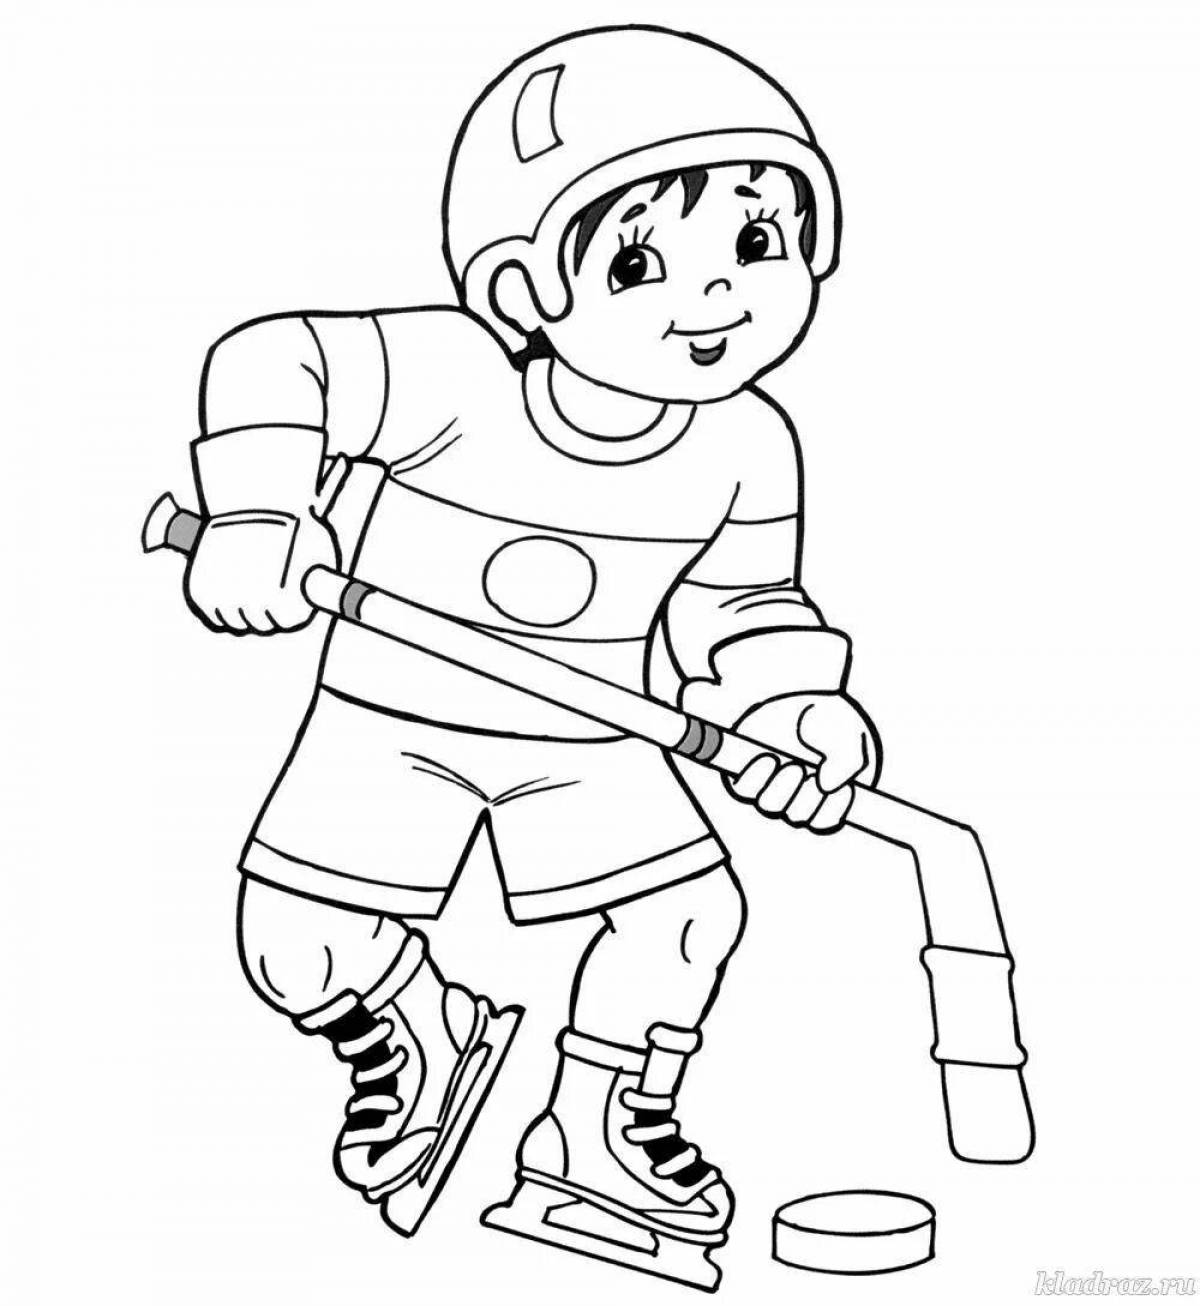 Lovely winter sports coloring page for kids